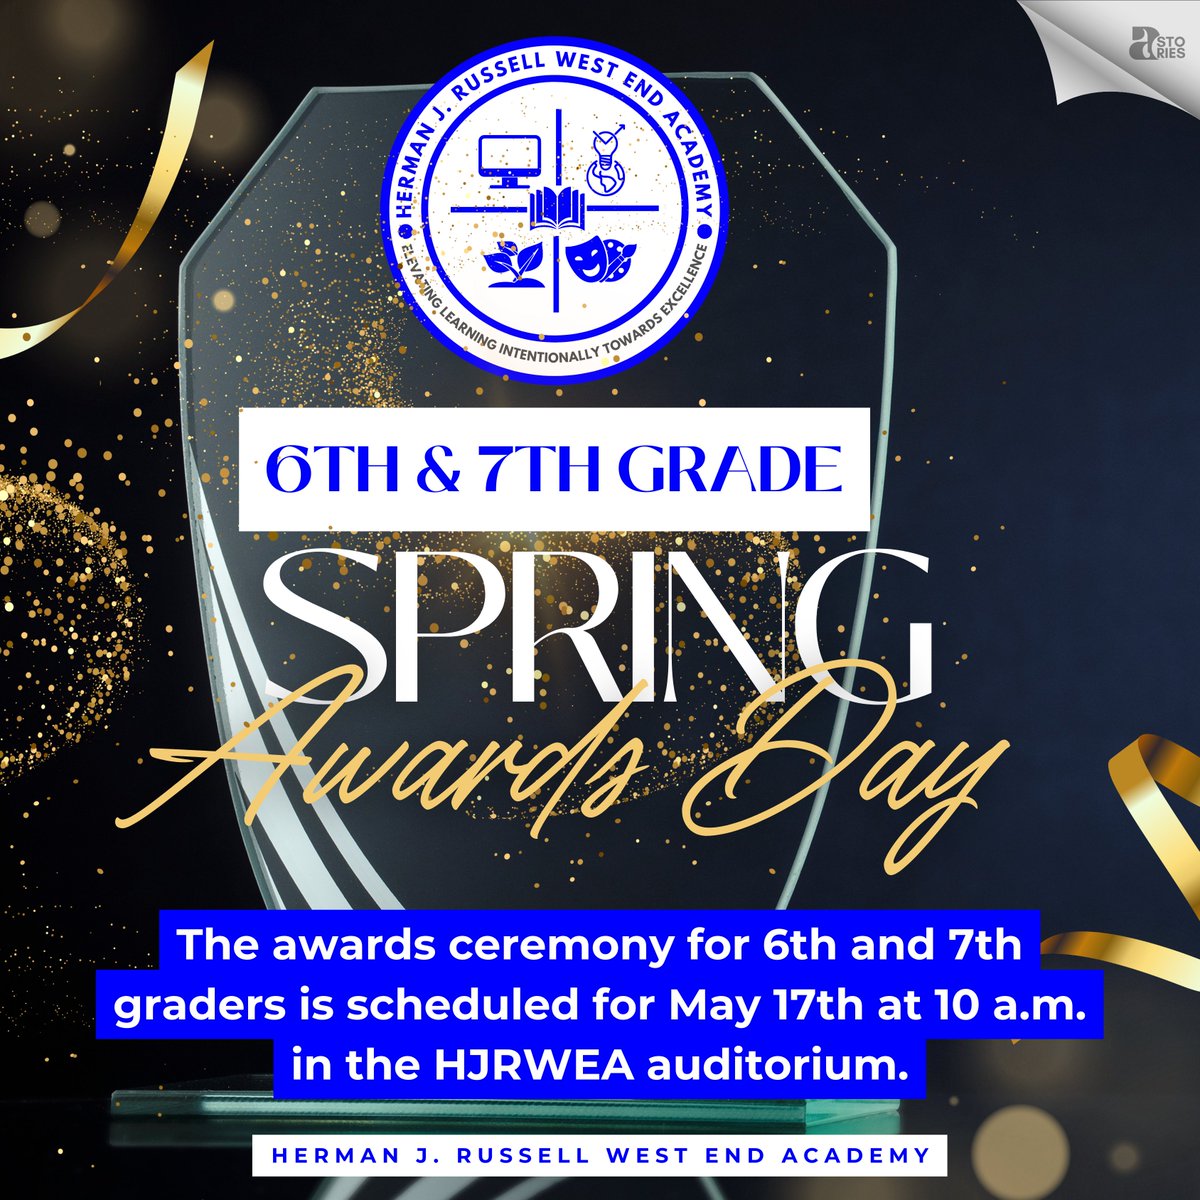 Reminder: The awards ceremony for 6th and 7th graders is scheduled for TODAY at 10 a.m. in the HJRWEA auditorium. @TDGreen_ @Retha_Woolfolk @HRWEACOUNSELING @apsupdate @DRVENZEN_aps